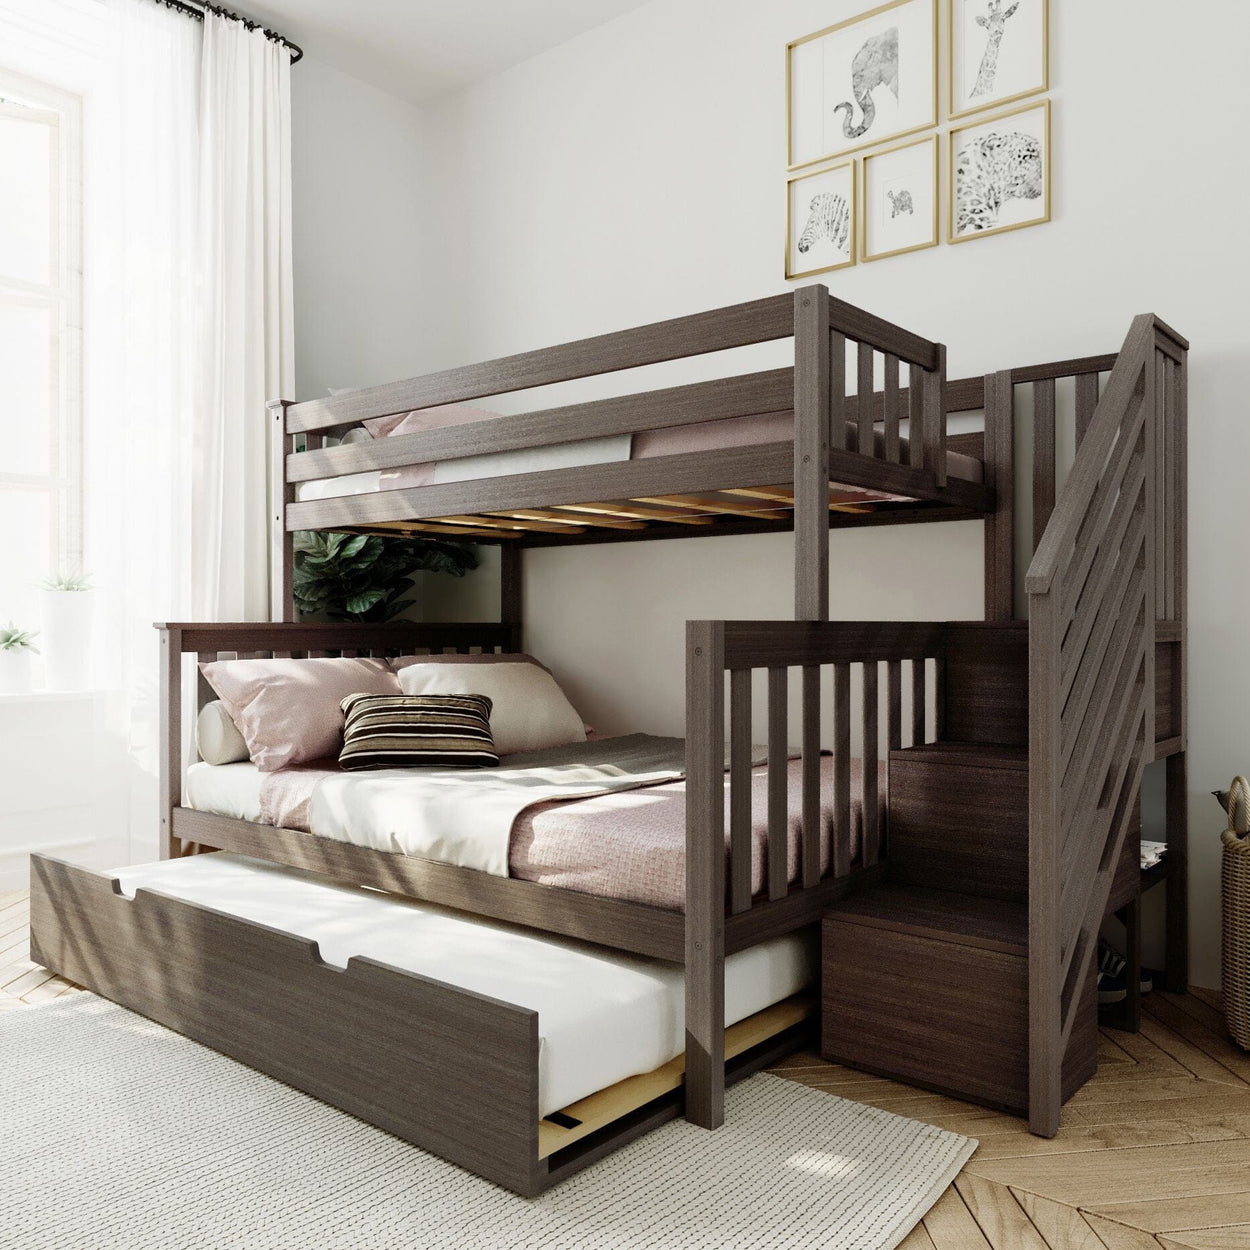 186235-151 : Bunk Beds Twin over Full Staircase Bunk with Trundle, Clay